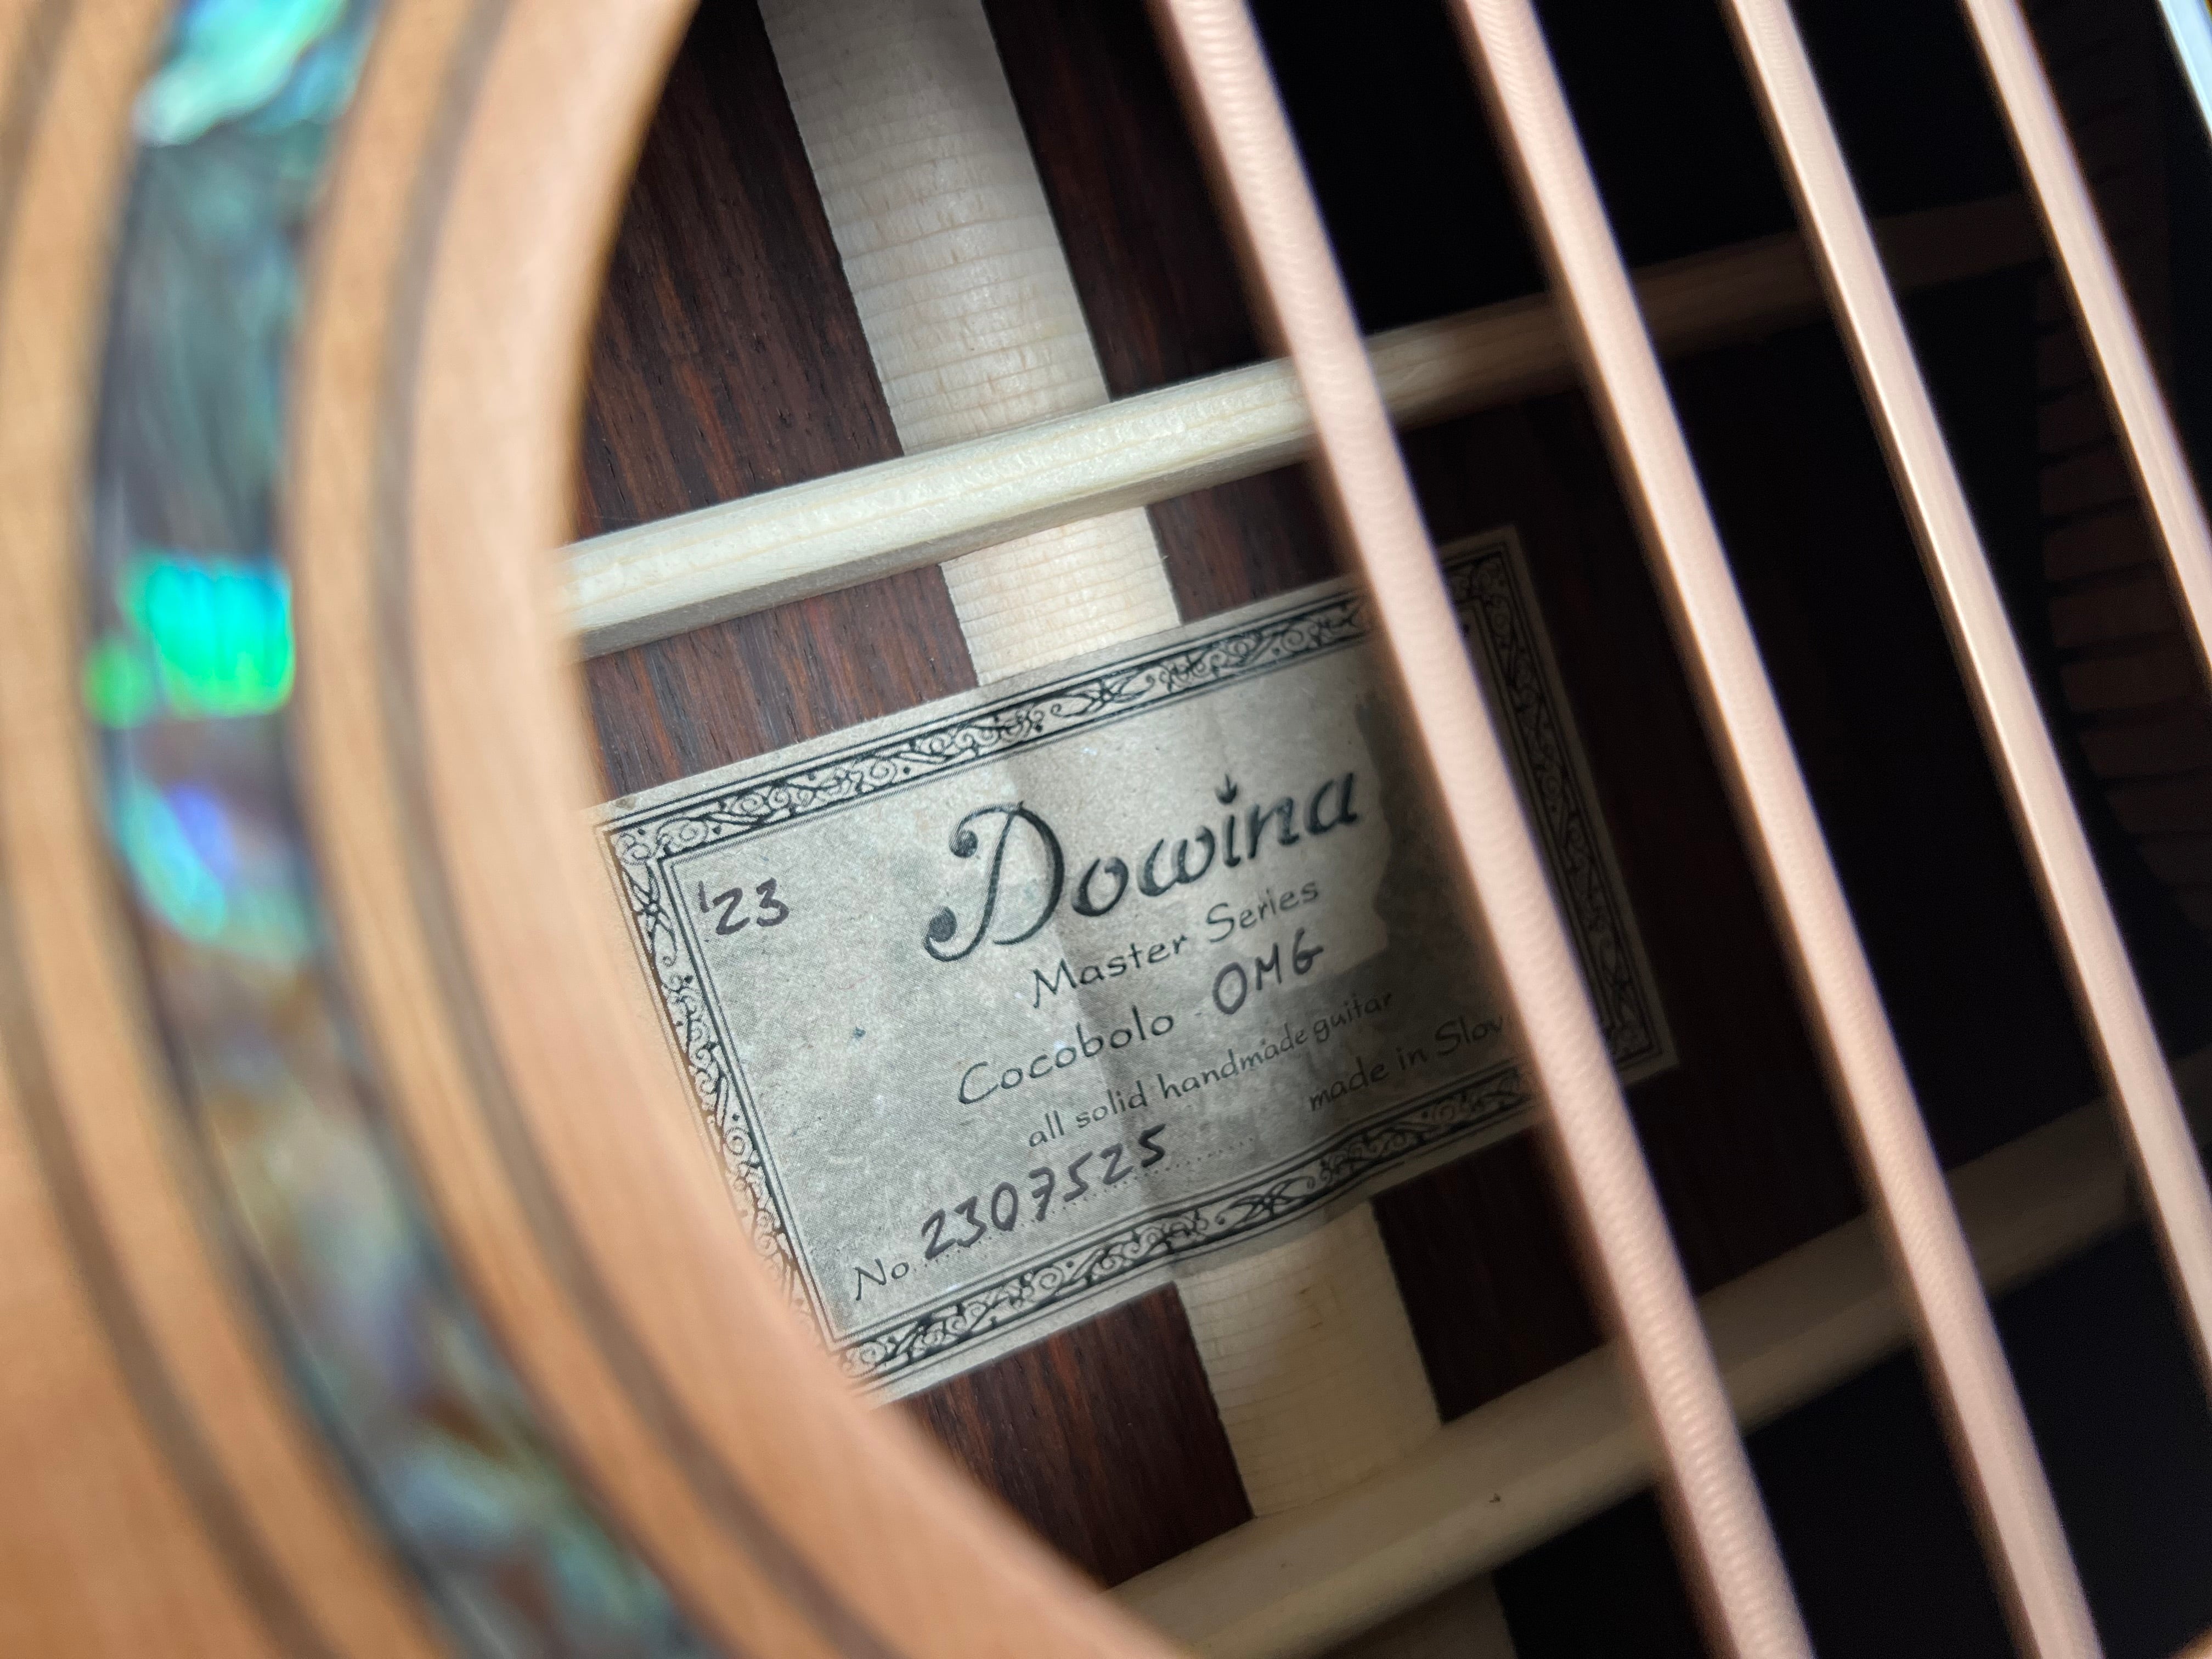 Dowina Cocobolo OMG, Acoustic Guitar for sale at Richards Guitars.